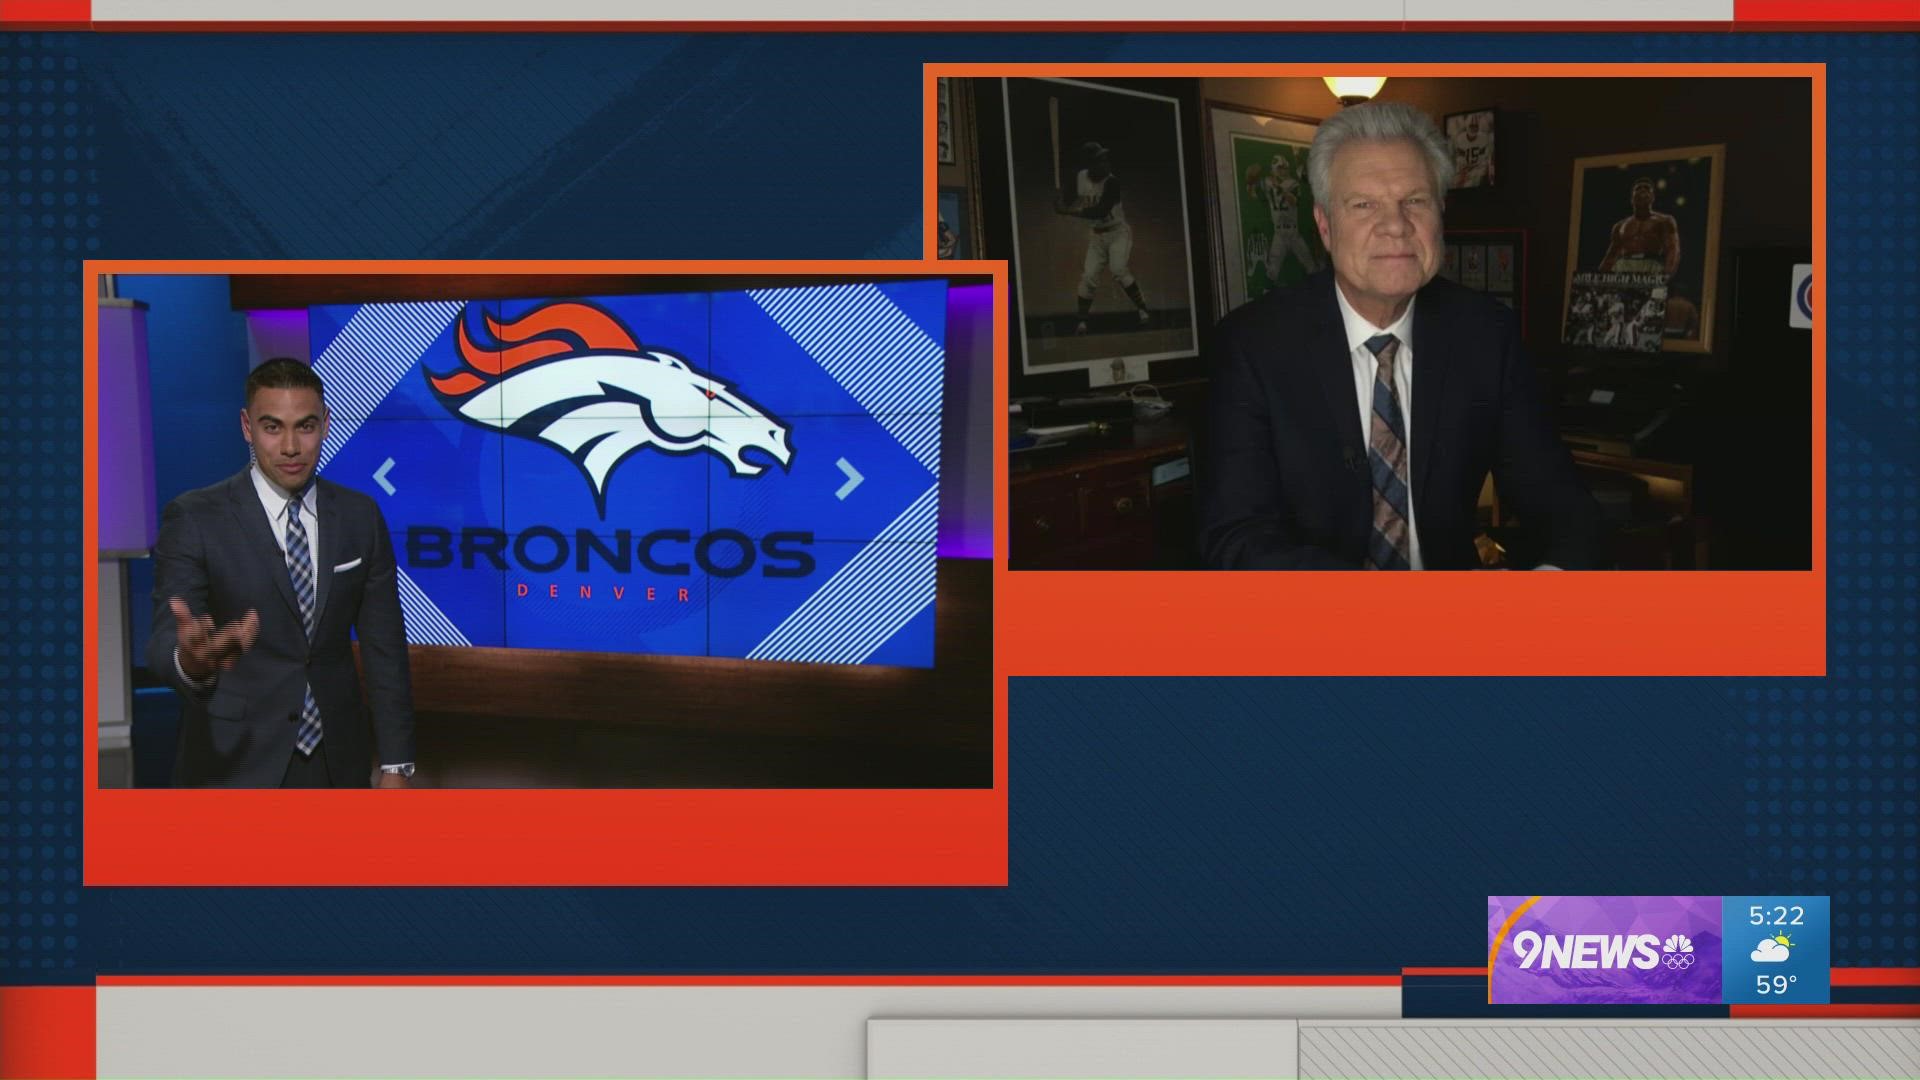 Mike Klis joined Jacob Tobey on 9NEWS to give an update on the expected announcement concerning the Denver Broncos ownership situation.